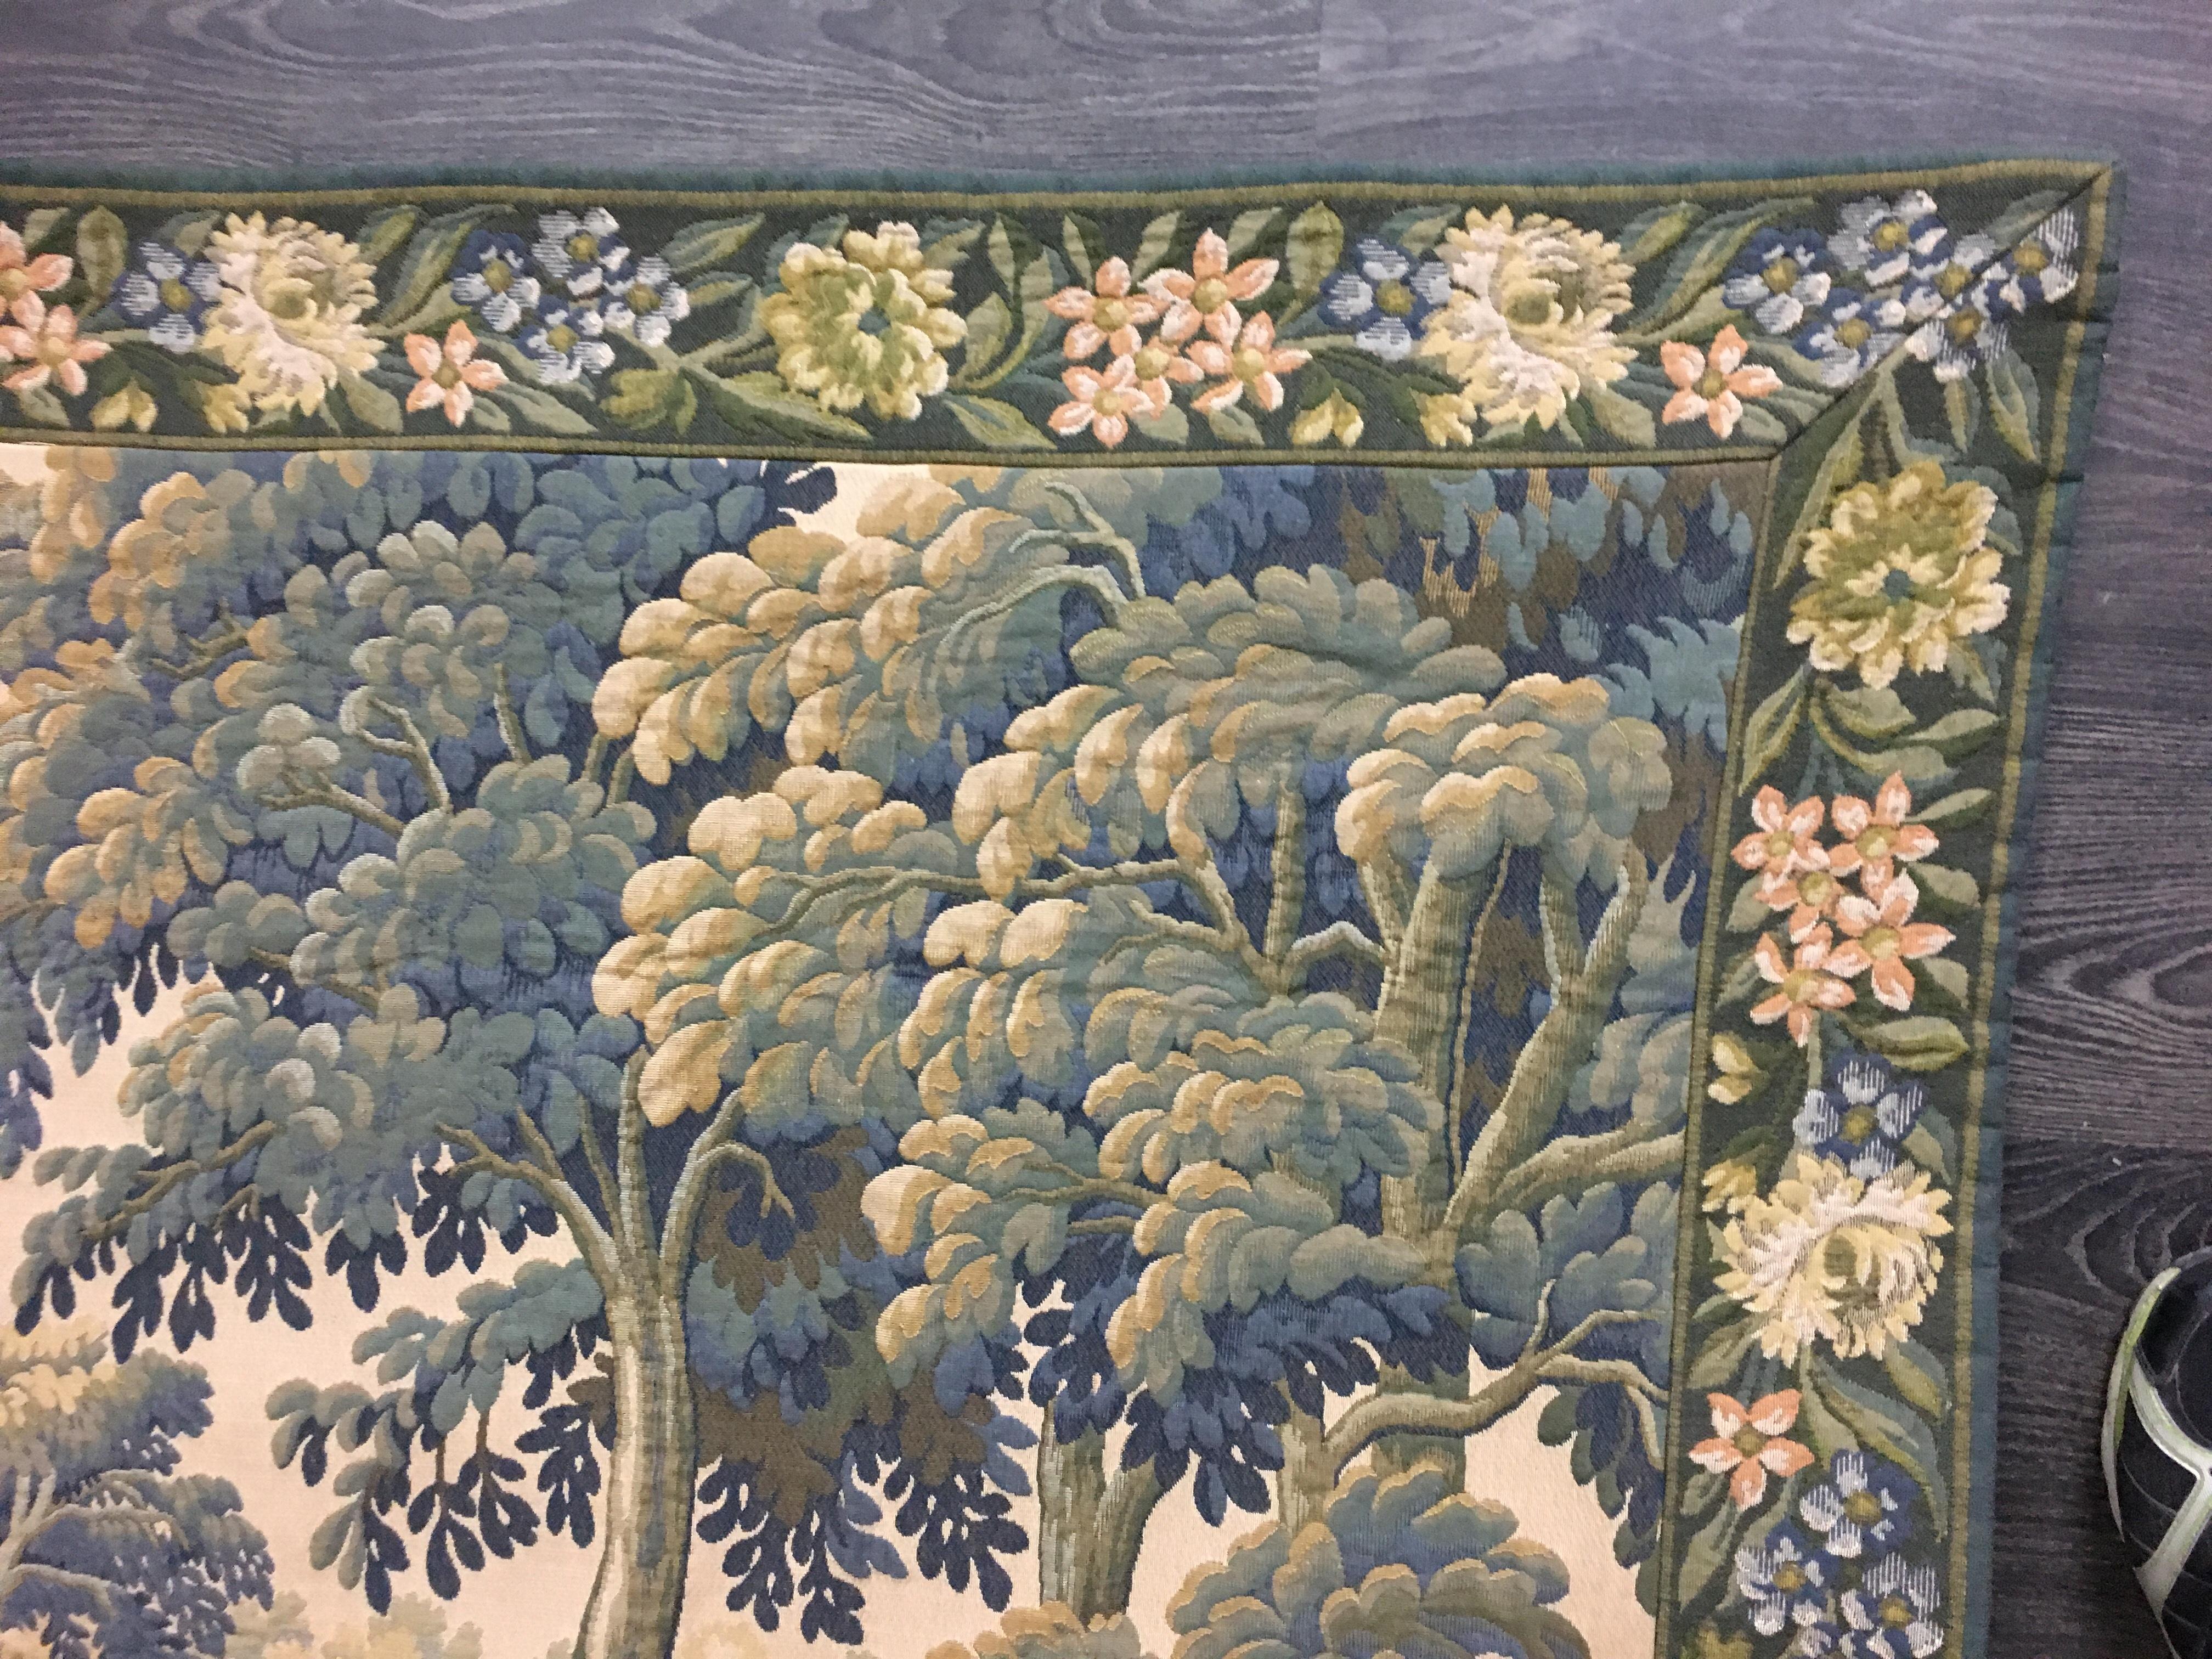 20th Century French Aubusson Style Verdure Tapestry with Rivers, Ducks, and Foliage